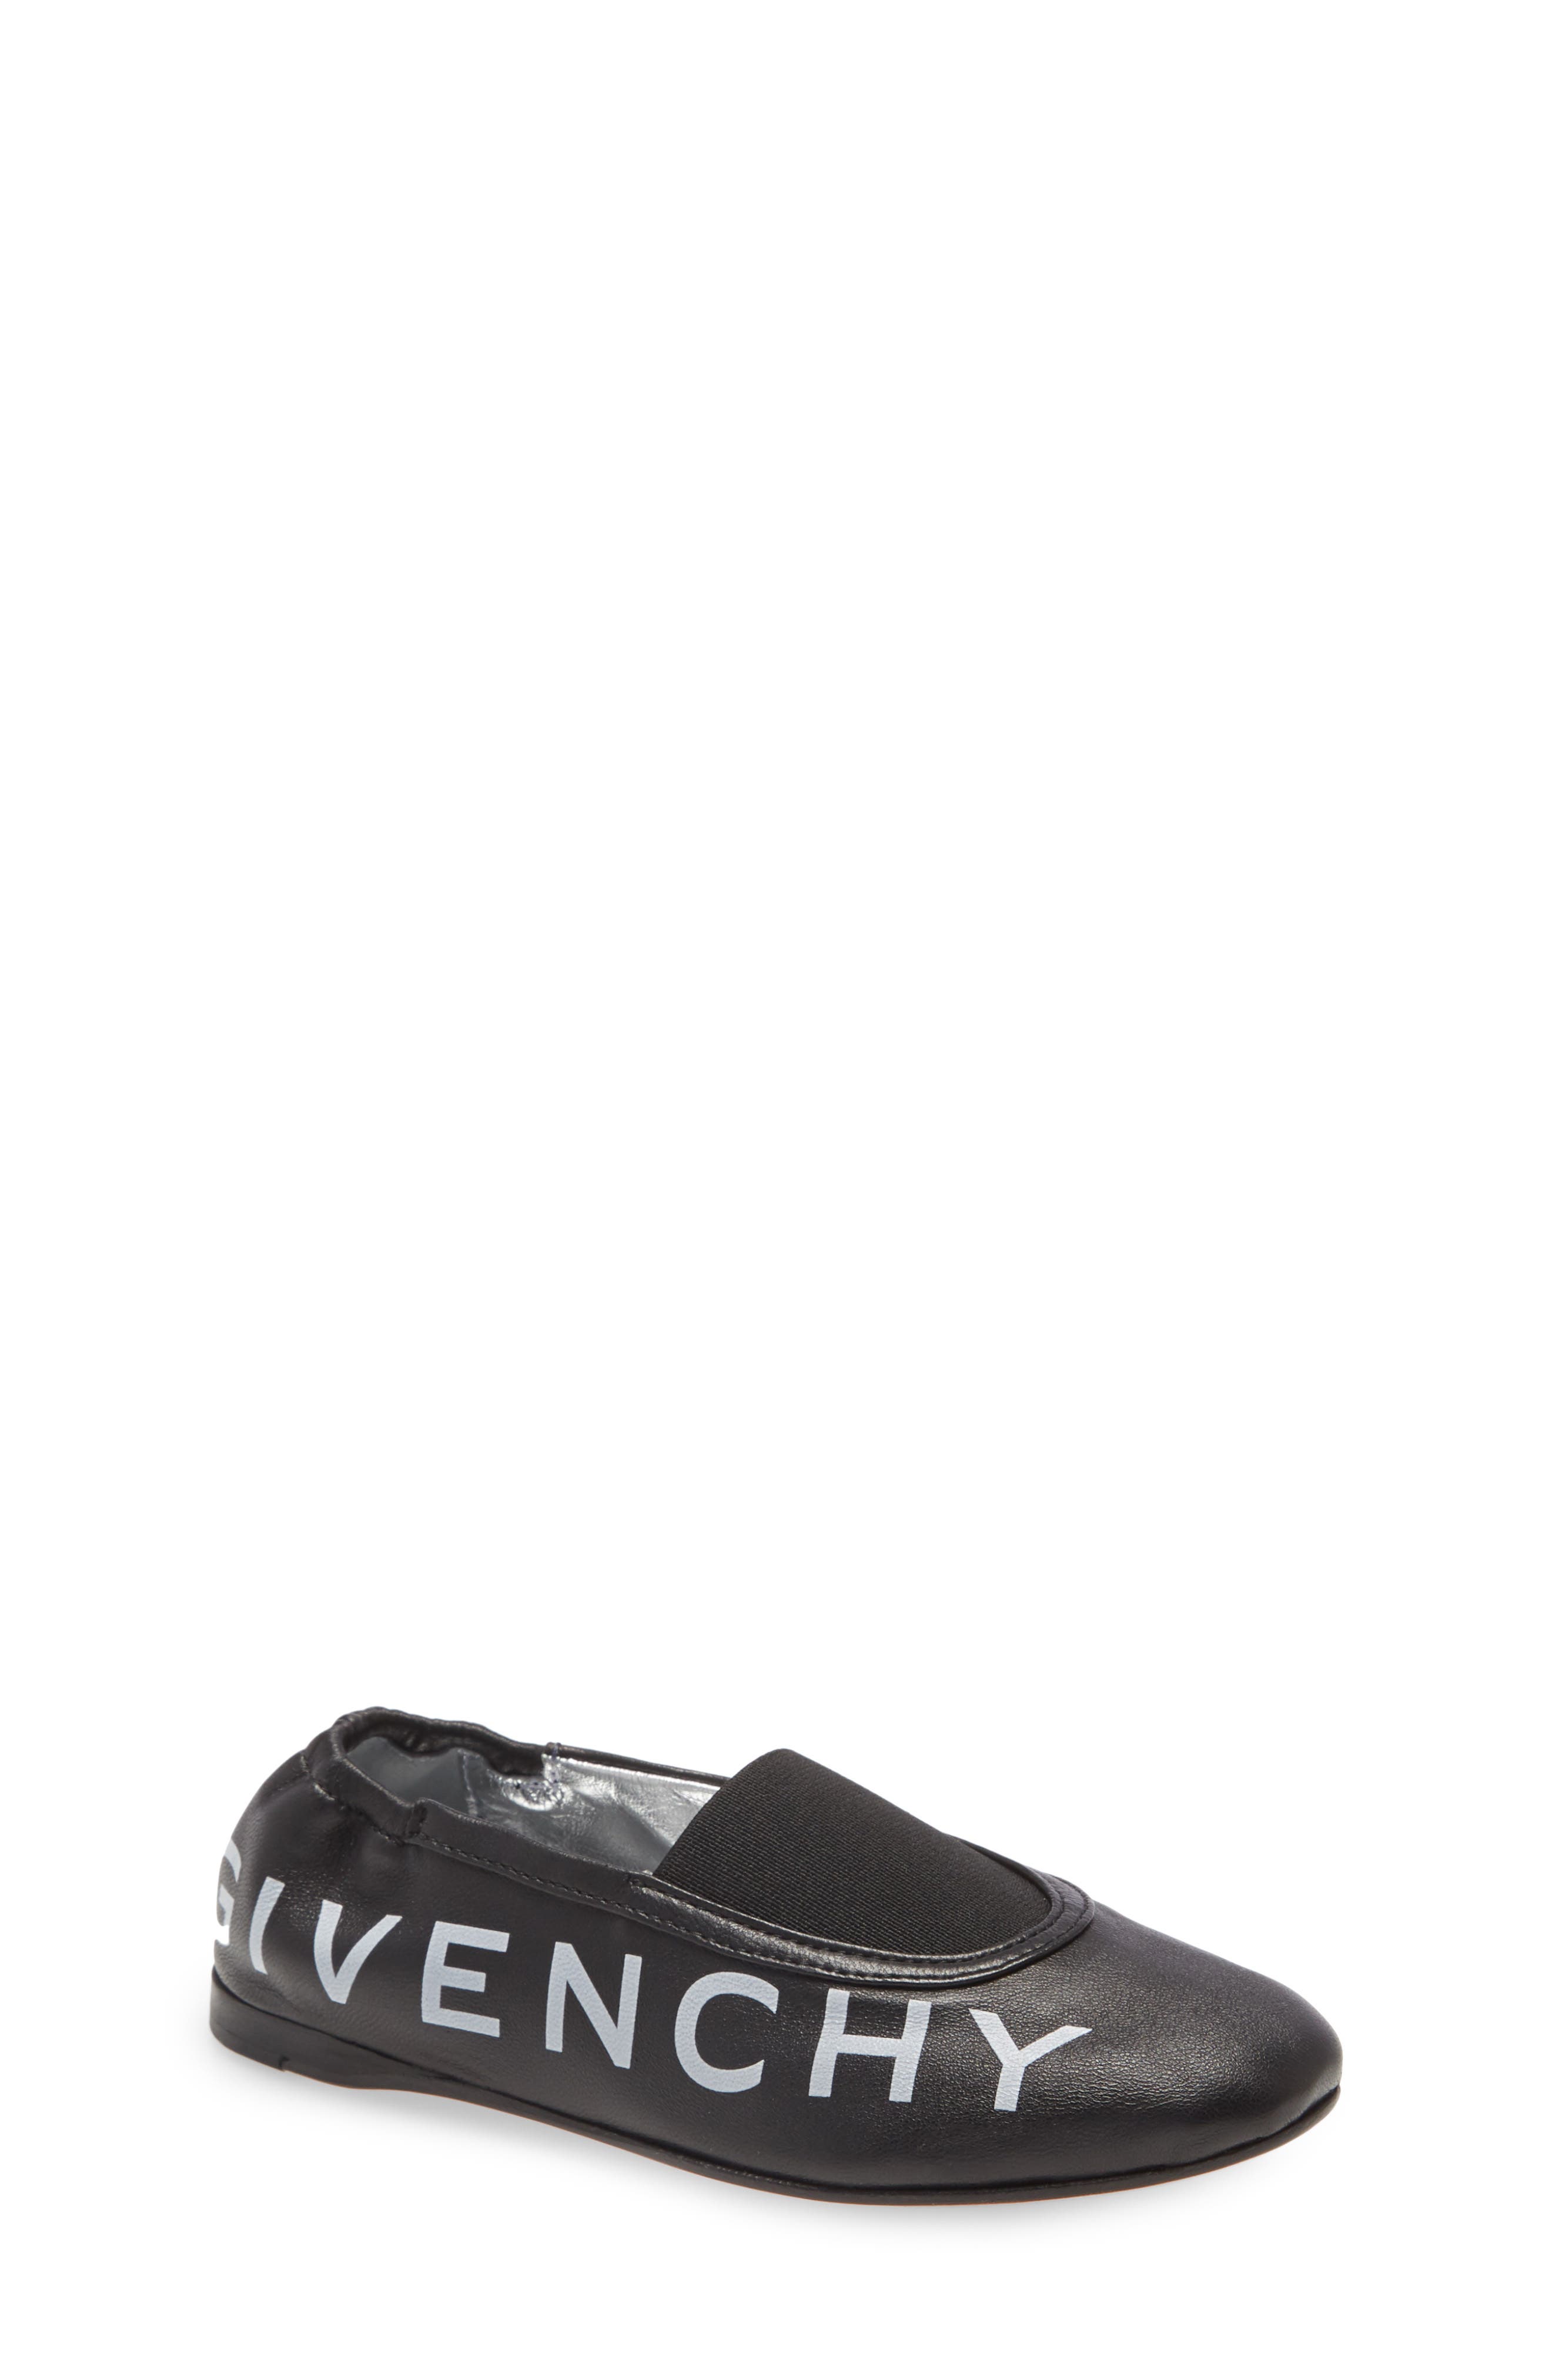 Toddler Girls' Givenchy Shoes (Sizes 7 